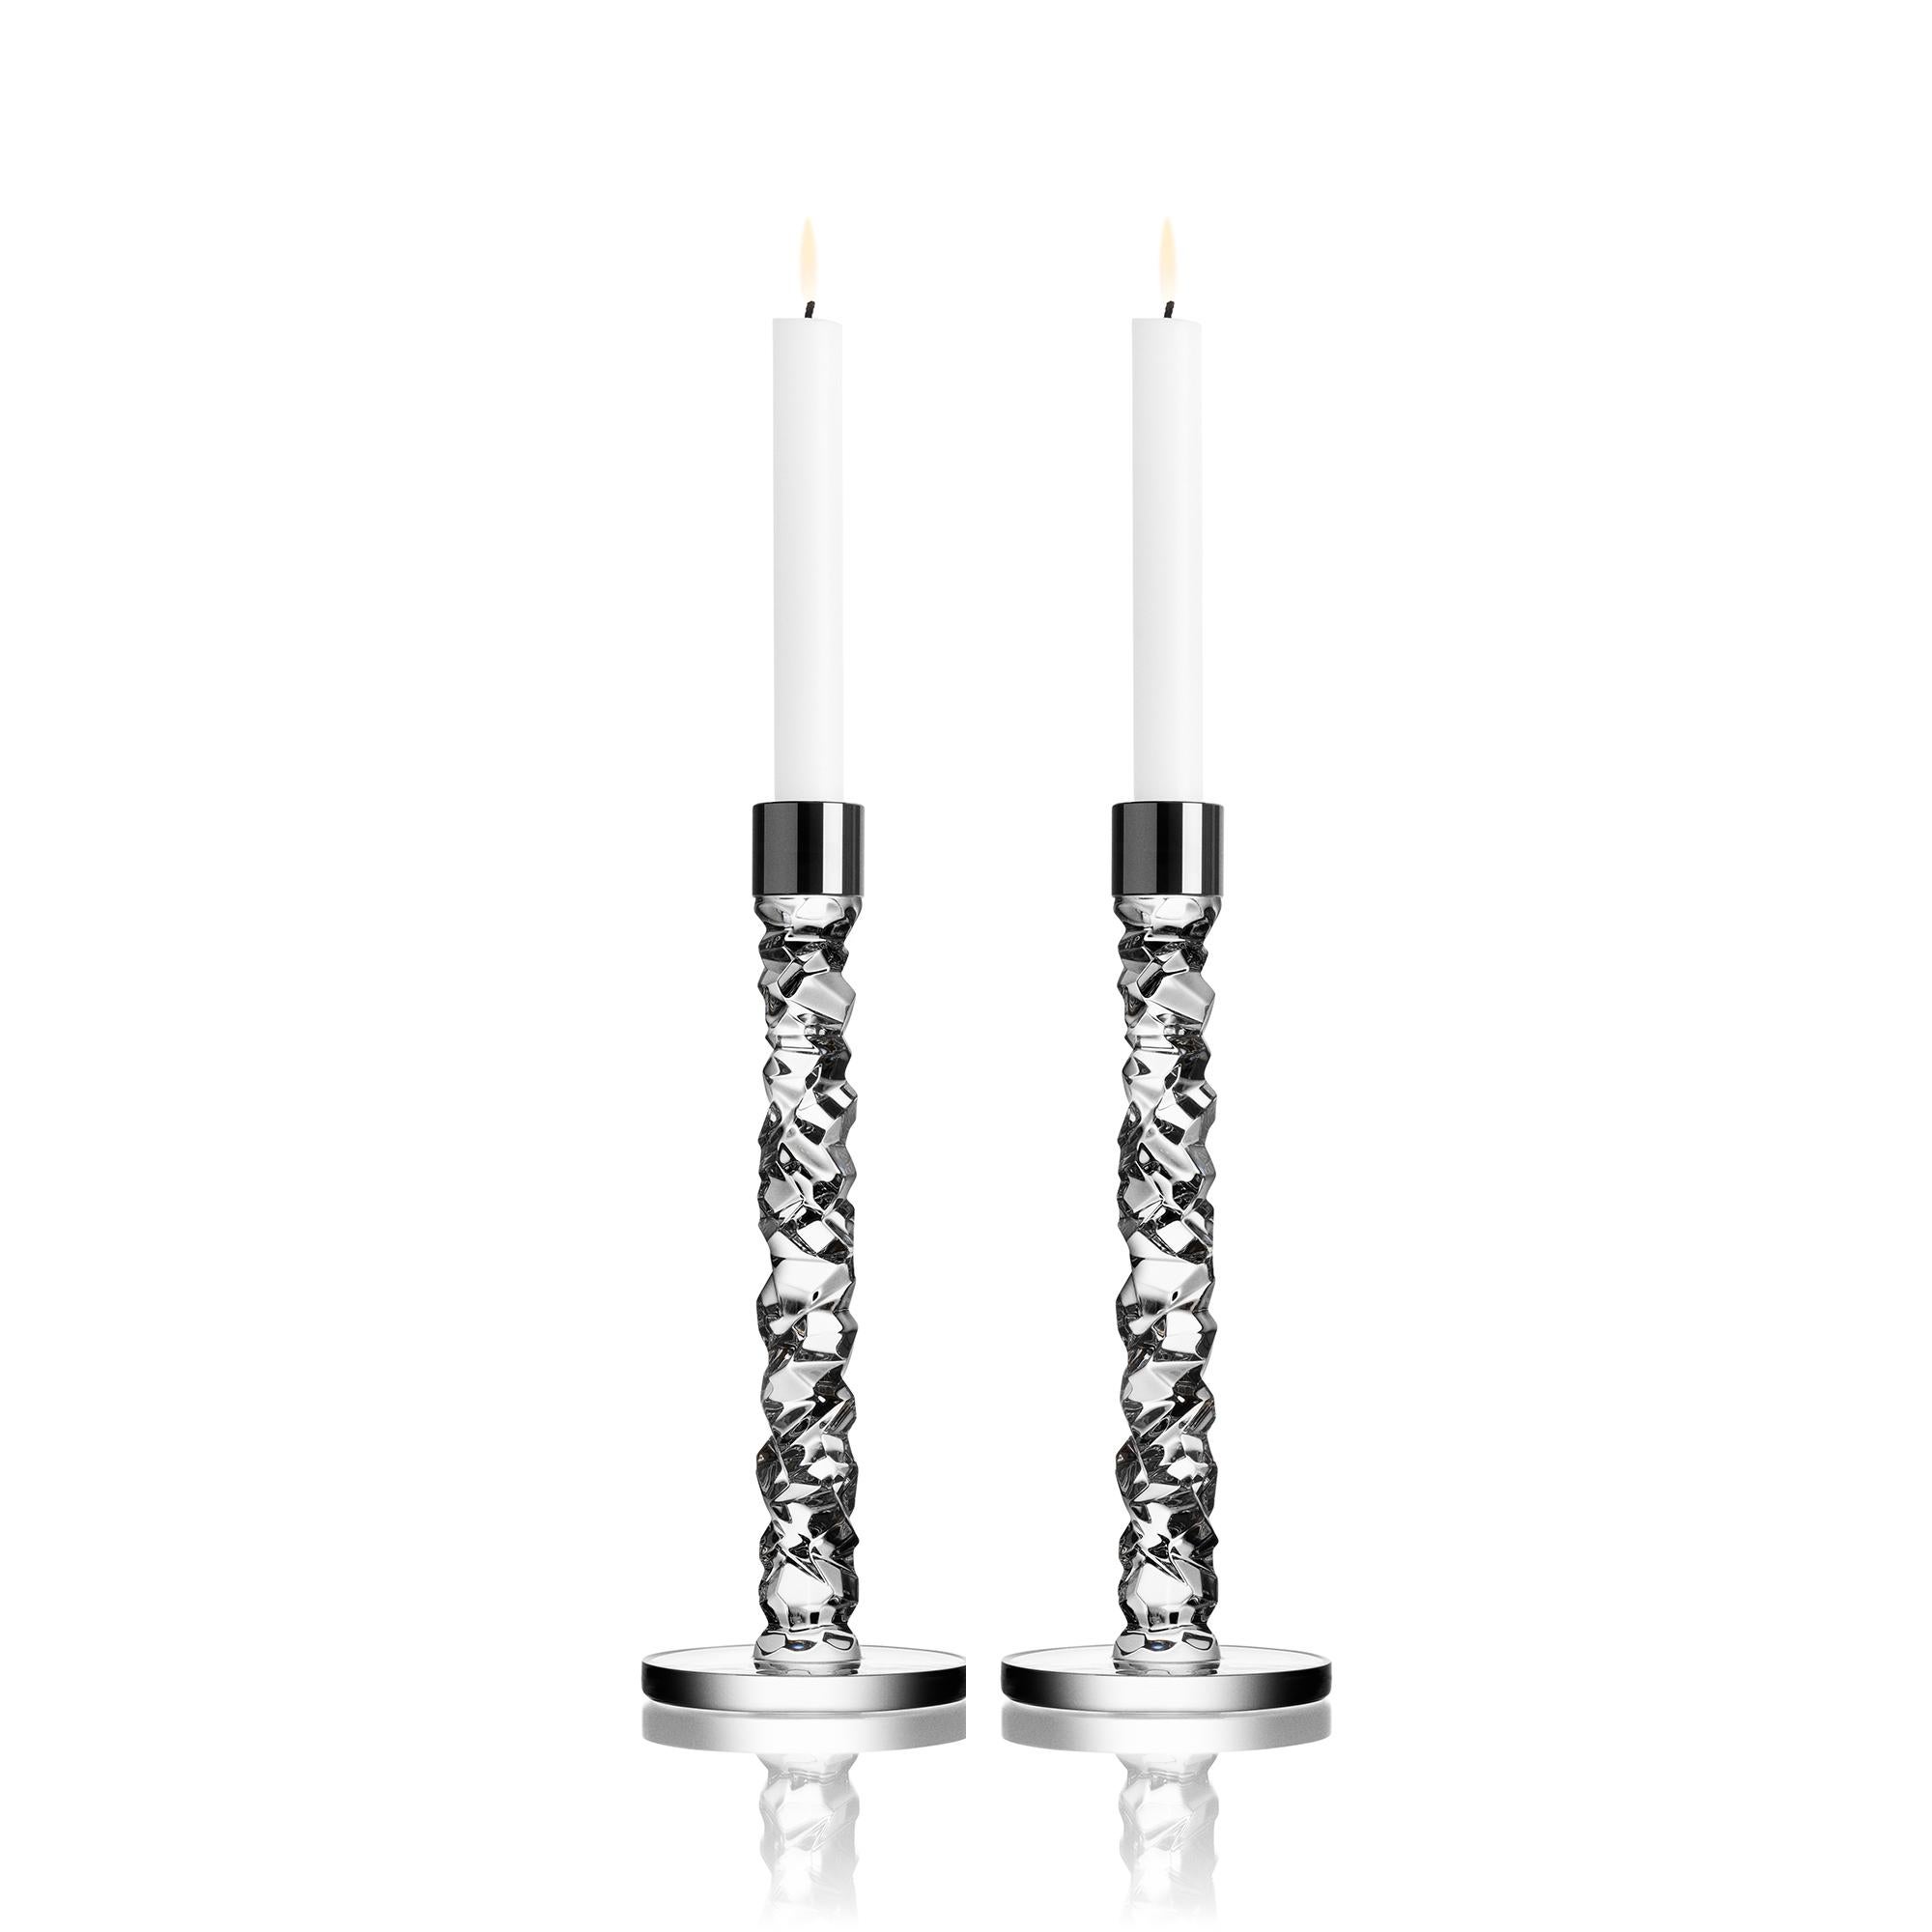 The Carat collection is based on a contemporary interpretation of the traditional cut glass for which Orrefors is world-renowned. The irregular geometry produces beautiful reflections of light in the crystal. The large candlestick in clear glass is